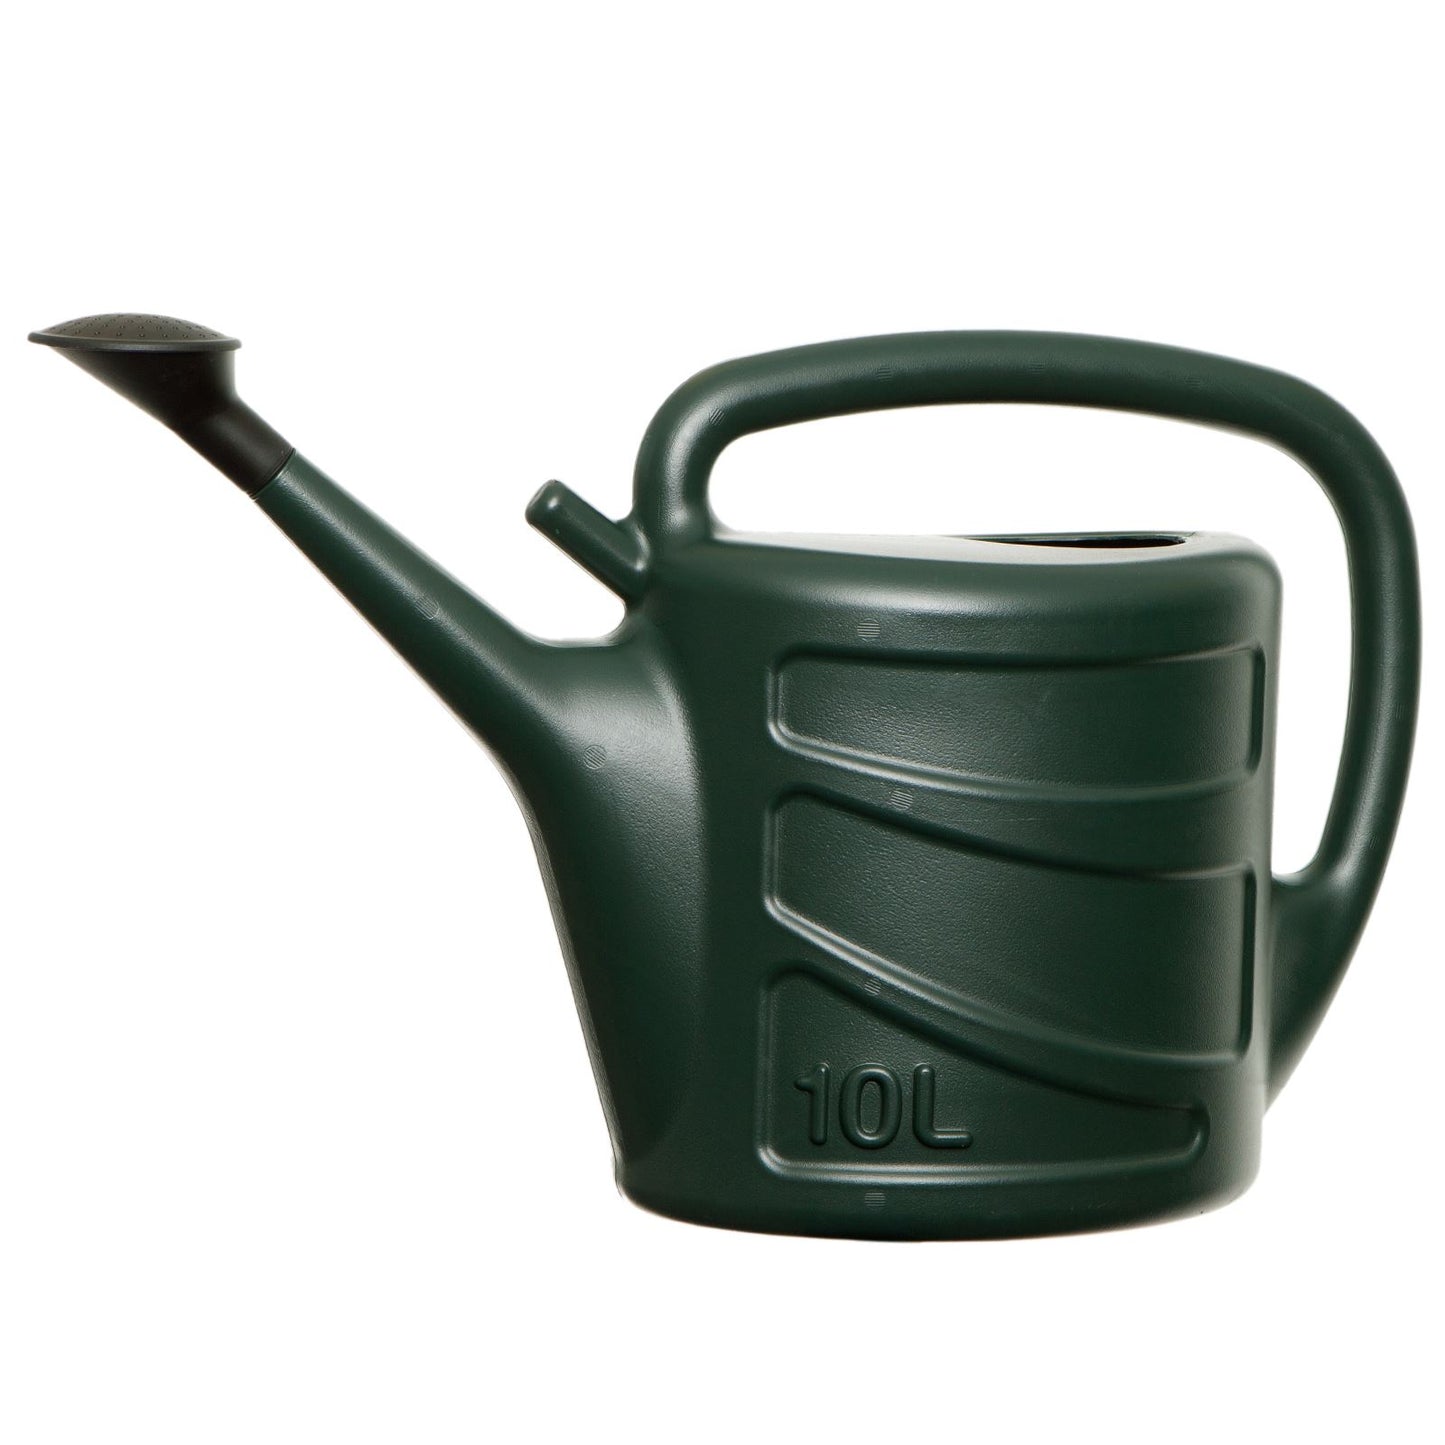 10-Liter Green Watering Can For Plants And Flowers